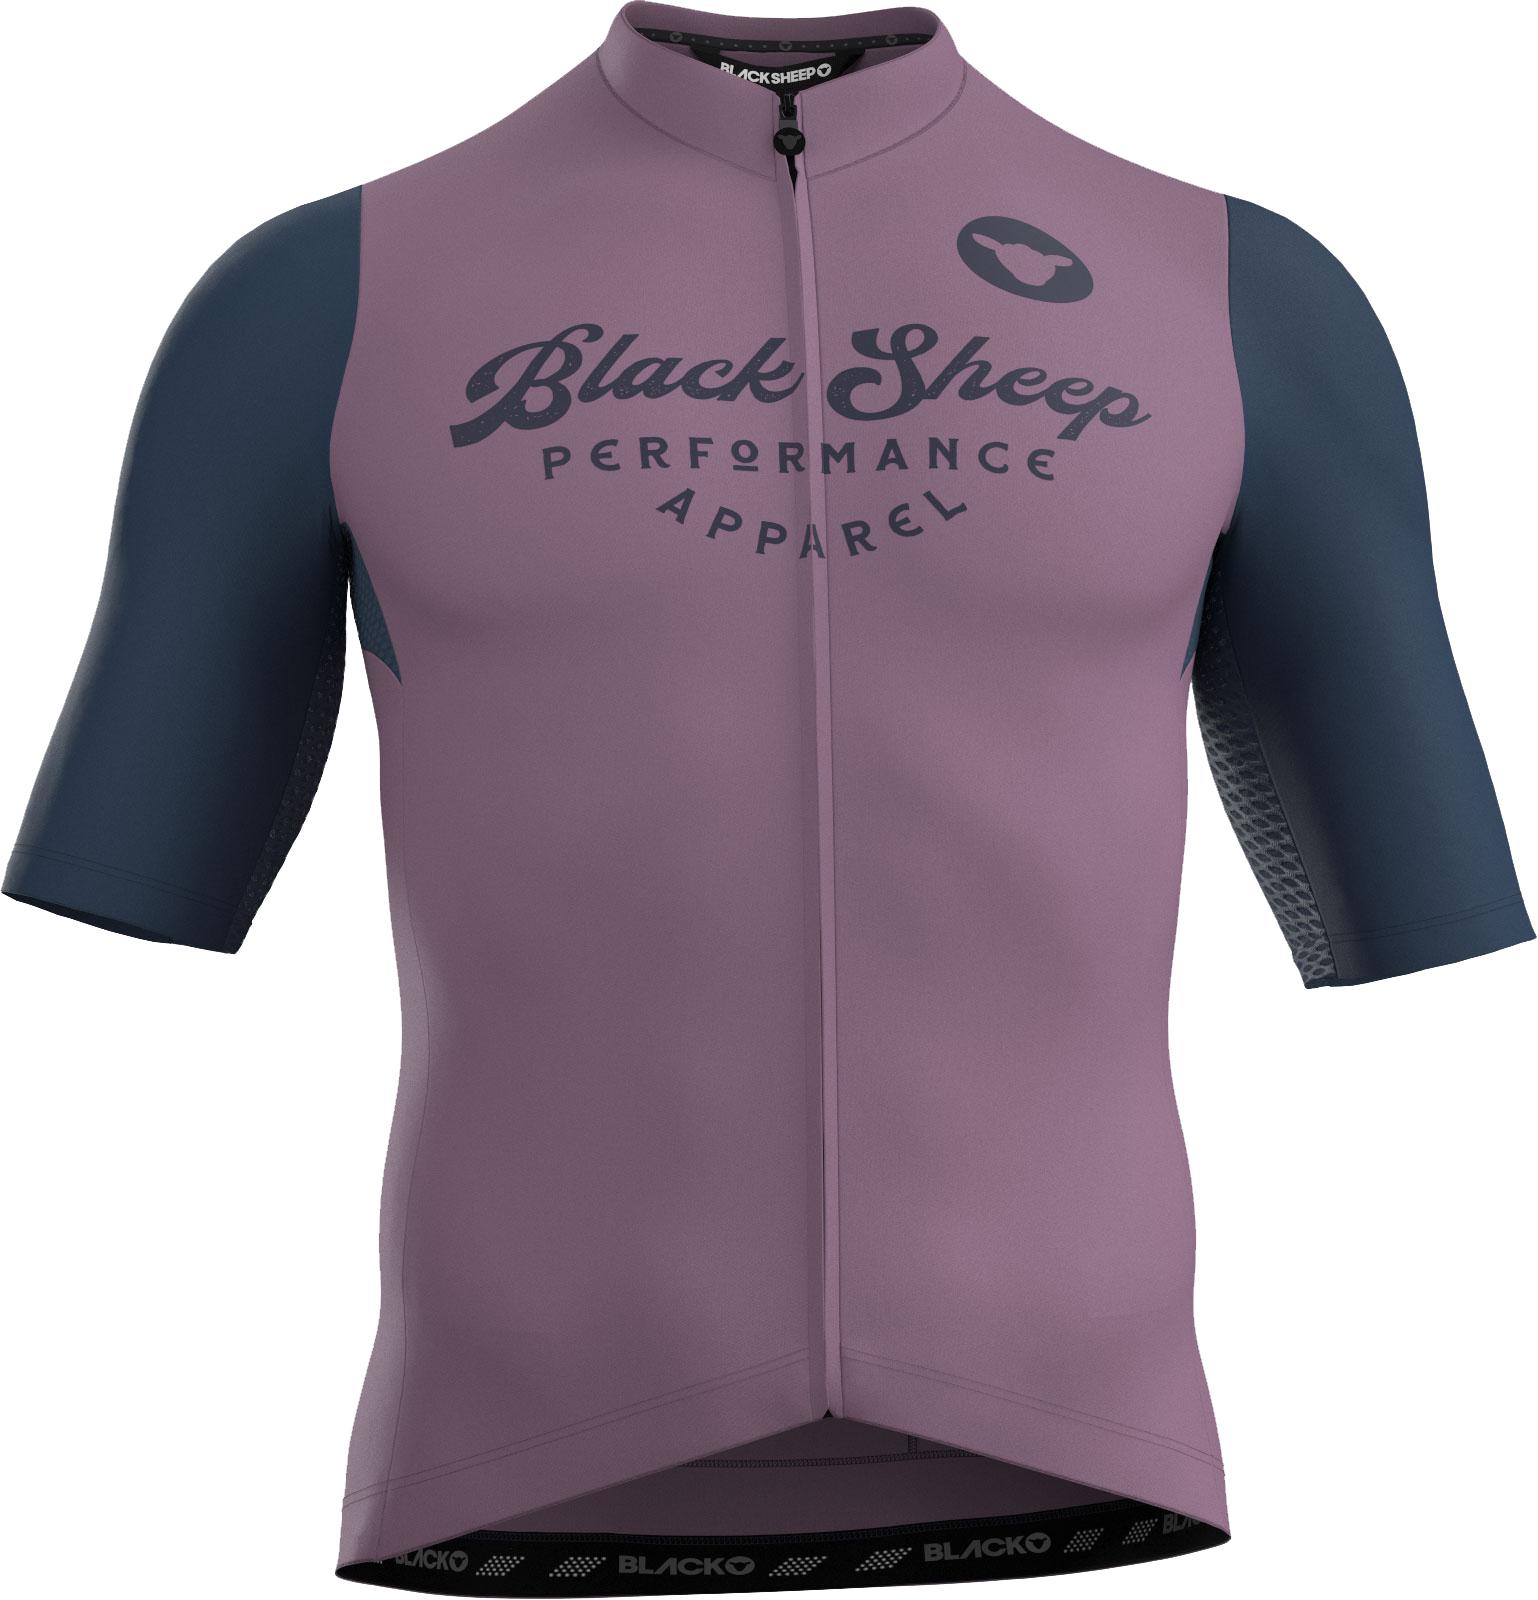 Black Sheep Cycling Essentials Team Cycling Jersey (limited Edition) - Purple